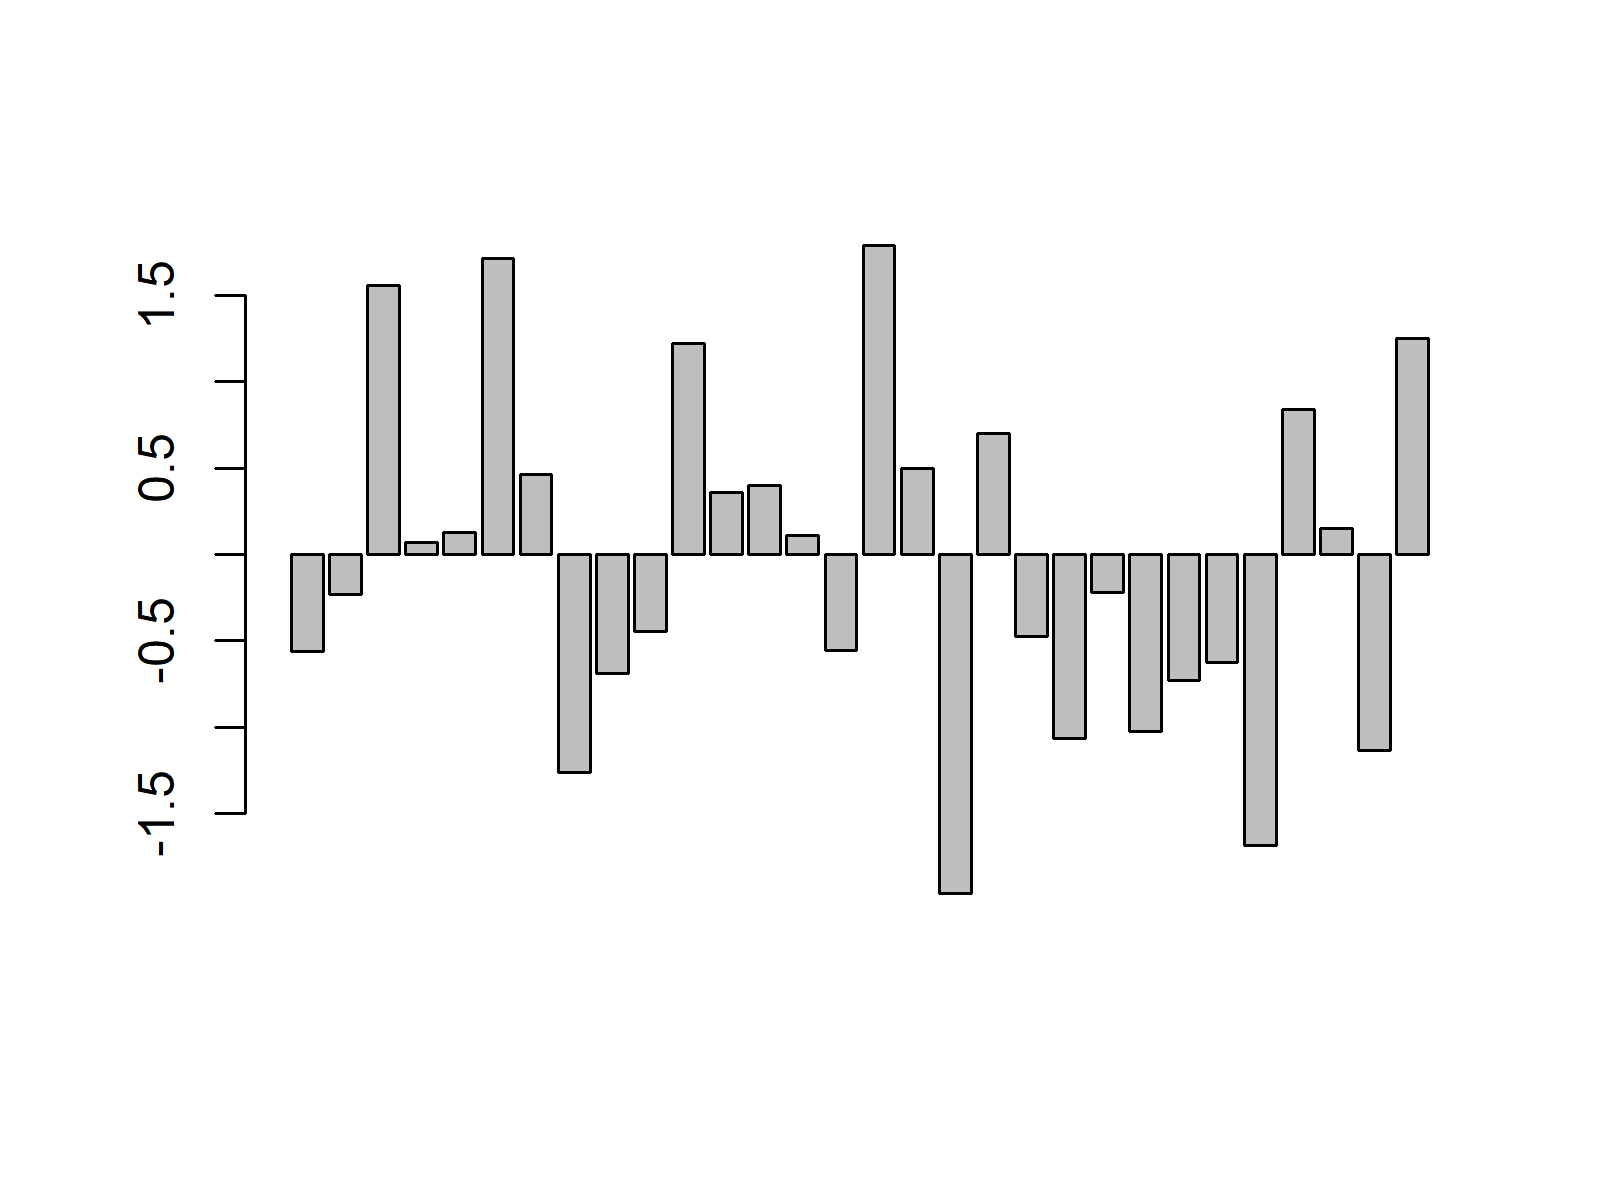 Example Barchart in R